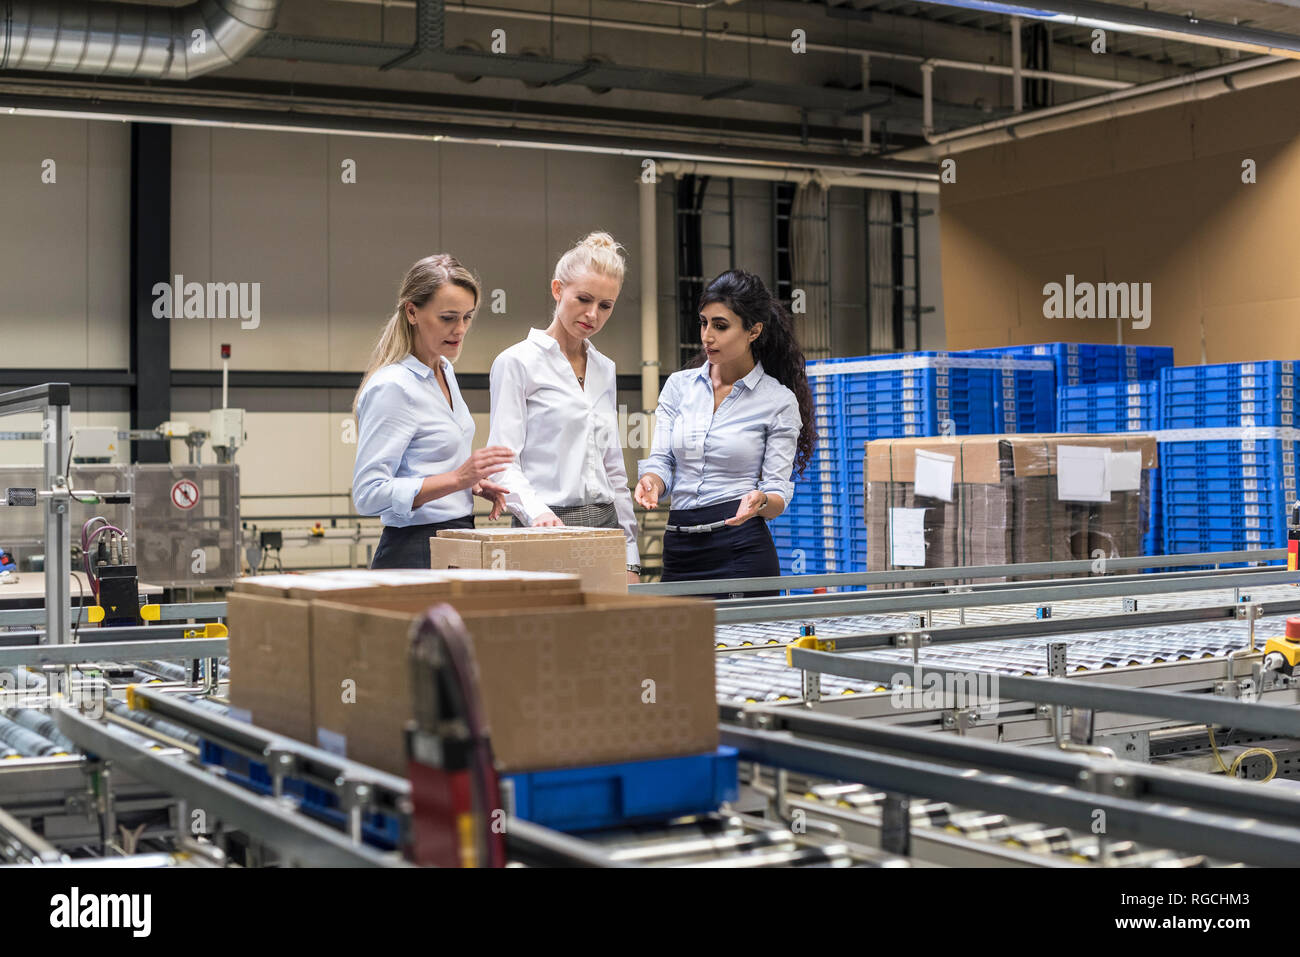 Three women discussing at conveyor belt in factory Stock Photo